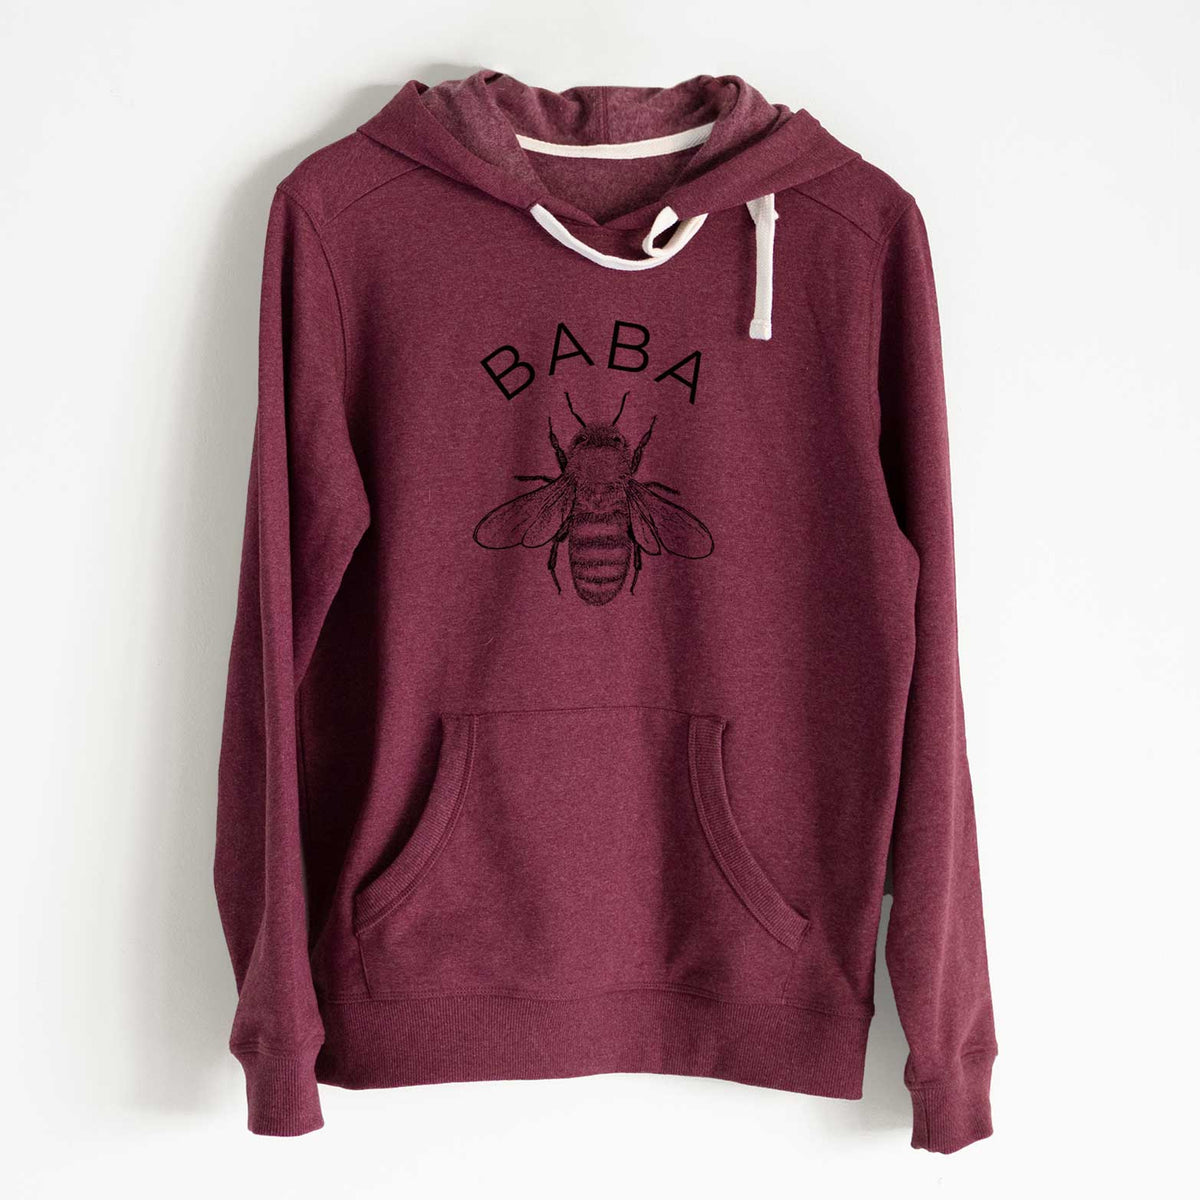 Baba Bee - Unisex Recycled Hoodie - CLOSEOUT - FINAL SALE